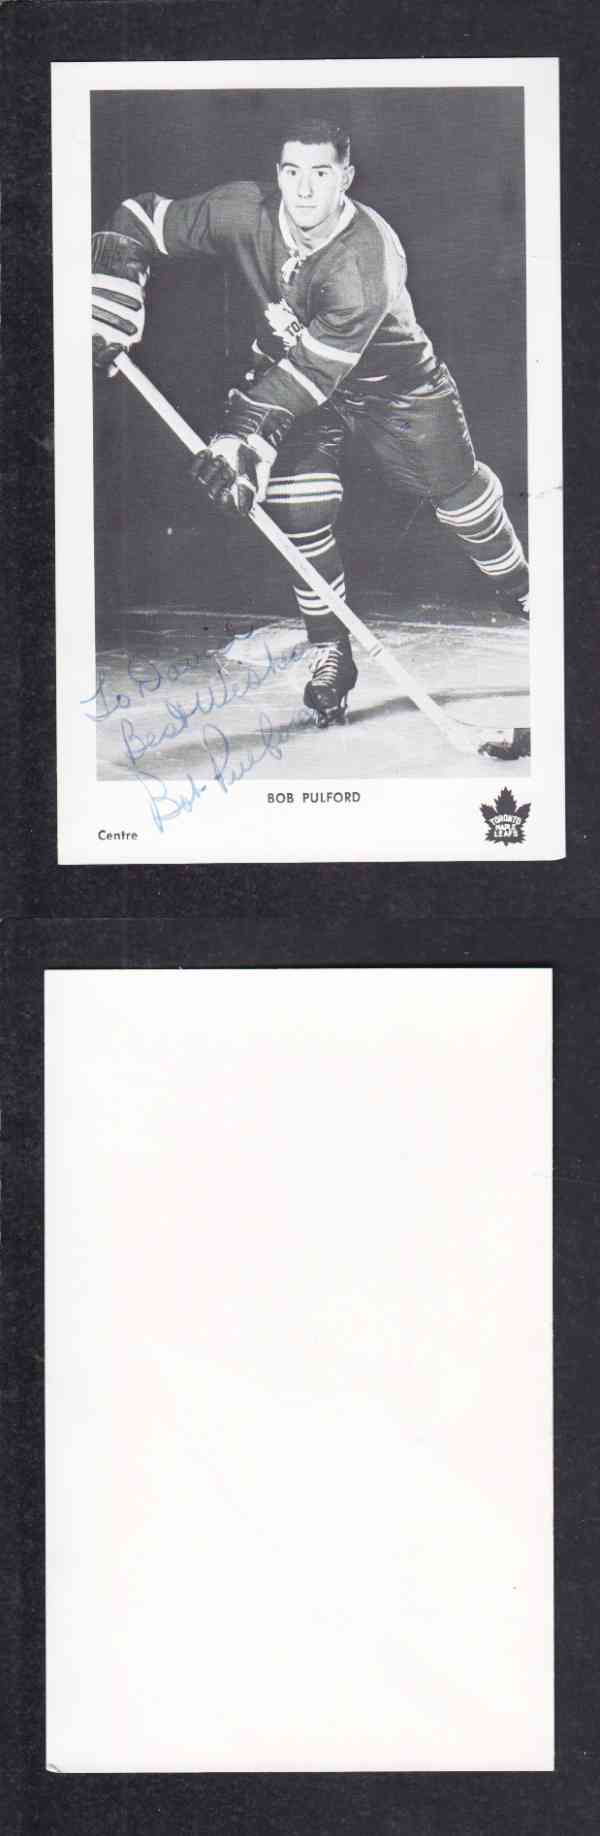 1960 'S TORONTO MAPLE LEAFS B.PULFORD  AUTOGRAPHED POST CARD photo